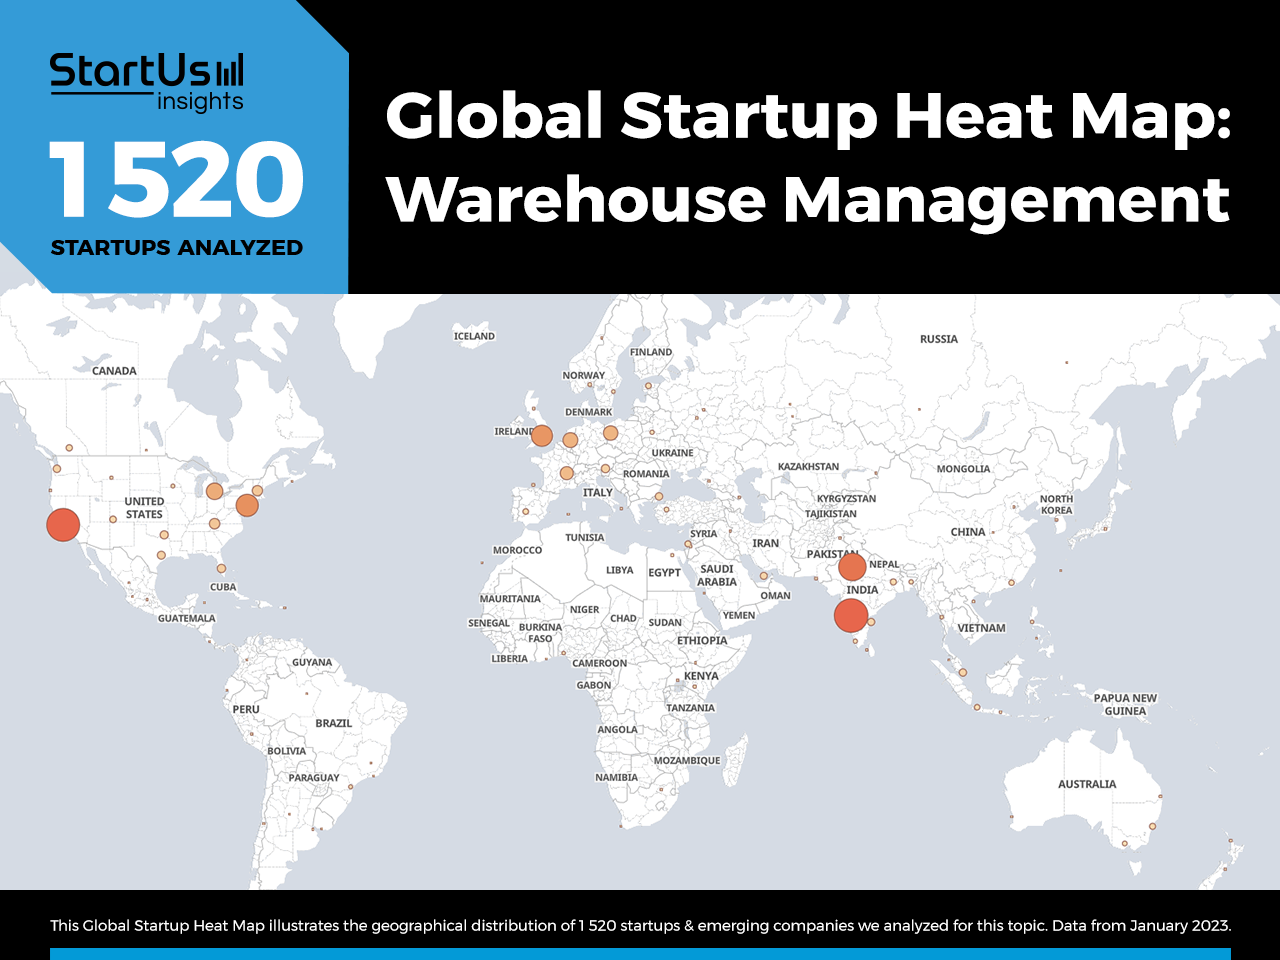 Warehouse-management-trends-innovation-TrendResearch-Heat-Map-StartUs-Insights-noresize